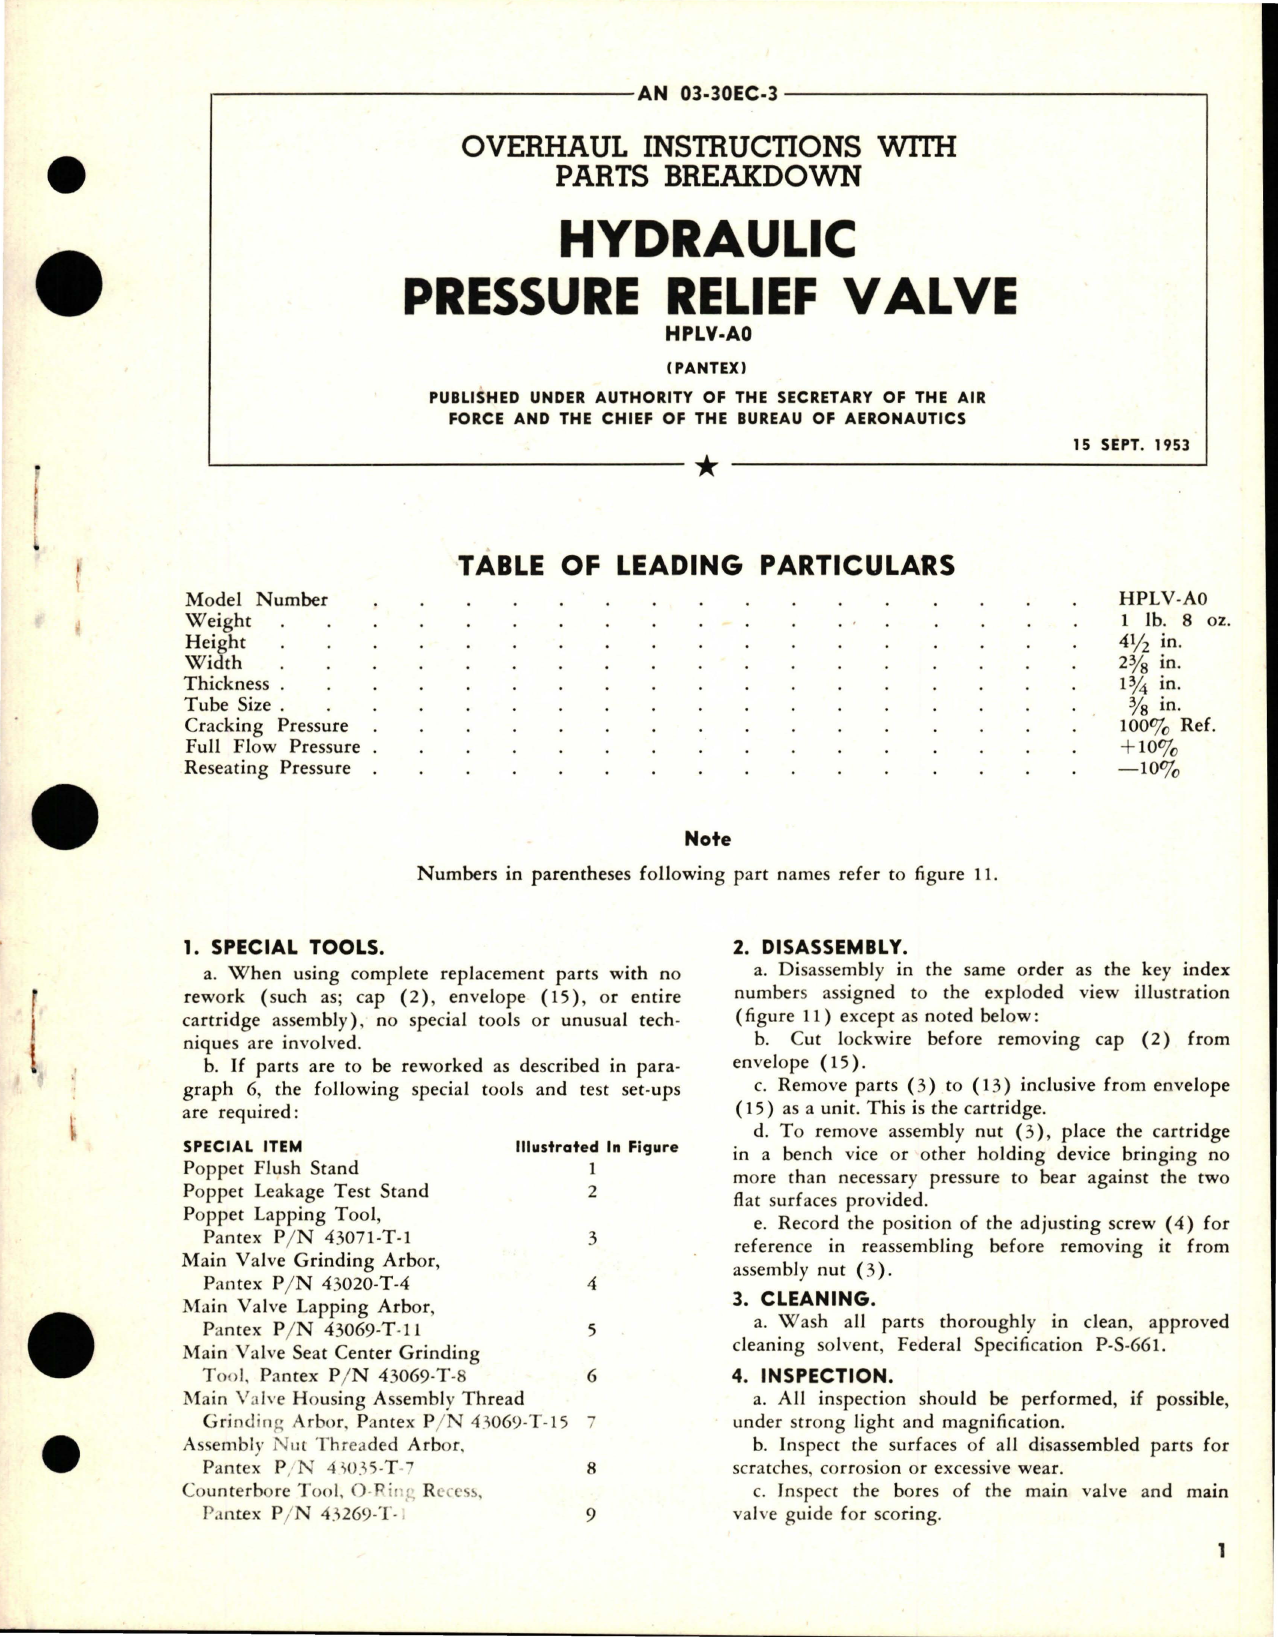 Sample page 1 from AirCorps Library document: Overhaul Instructions with Parts Breakdown for Hydraulic Pressure Relief Valve - HPLV-A0